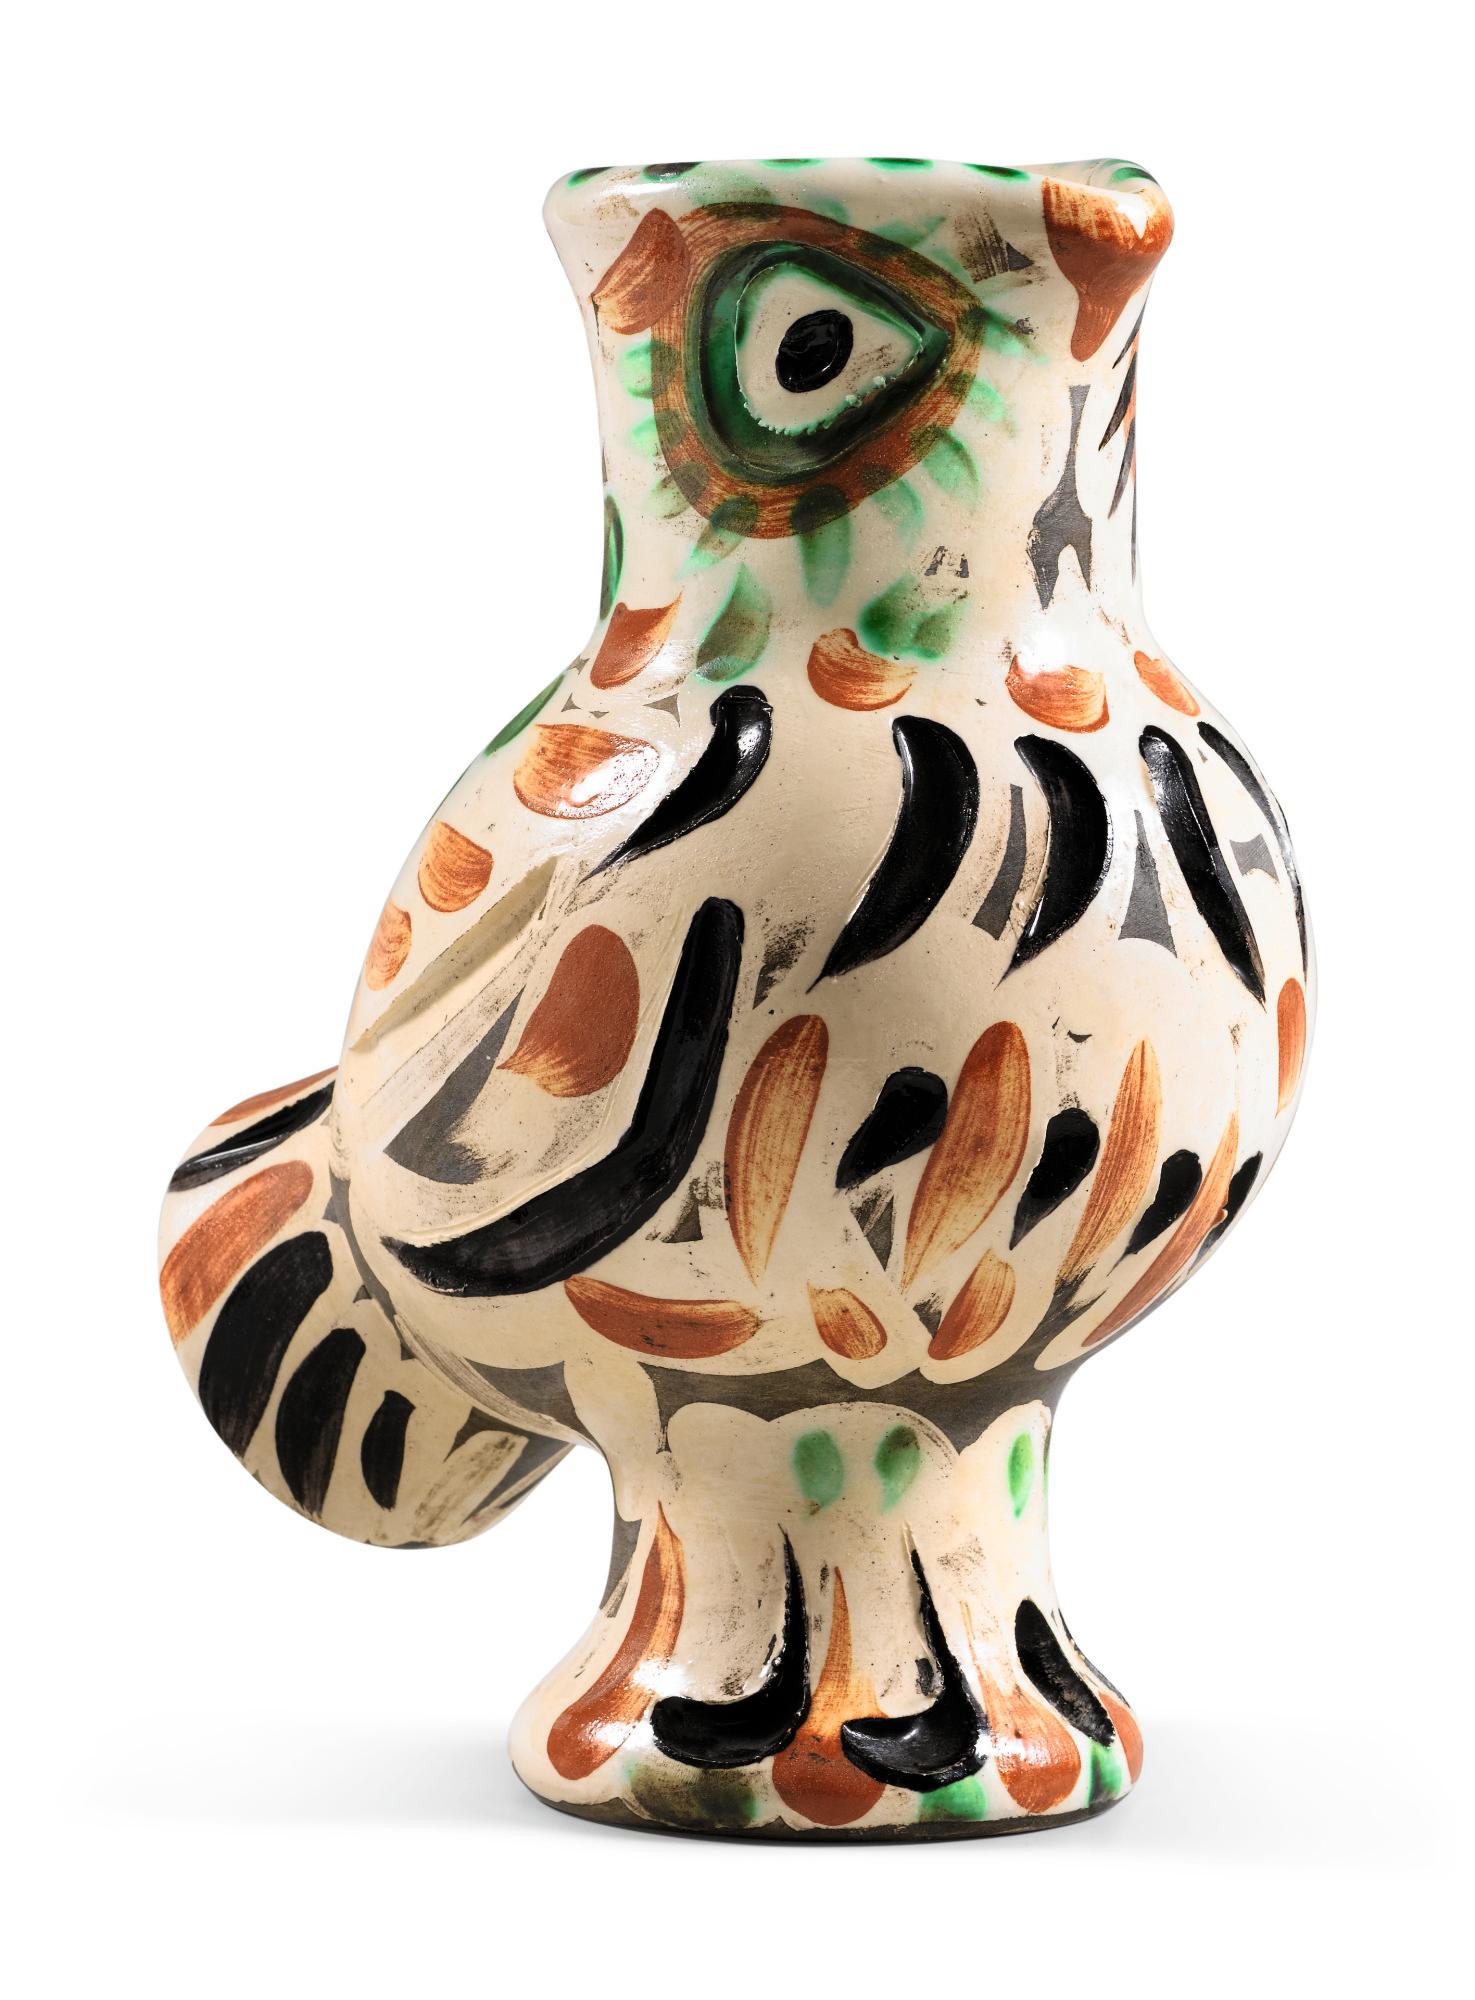 This beautiful Picasso ceramic Vase 'Chouette,' Ramié 602 is one in an edition of 350 and is made of white earthenware ceramic vase, partially engraved, with colored engobe and glaze 

Please contact us with any questions!